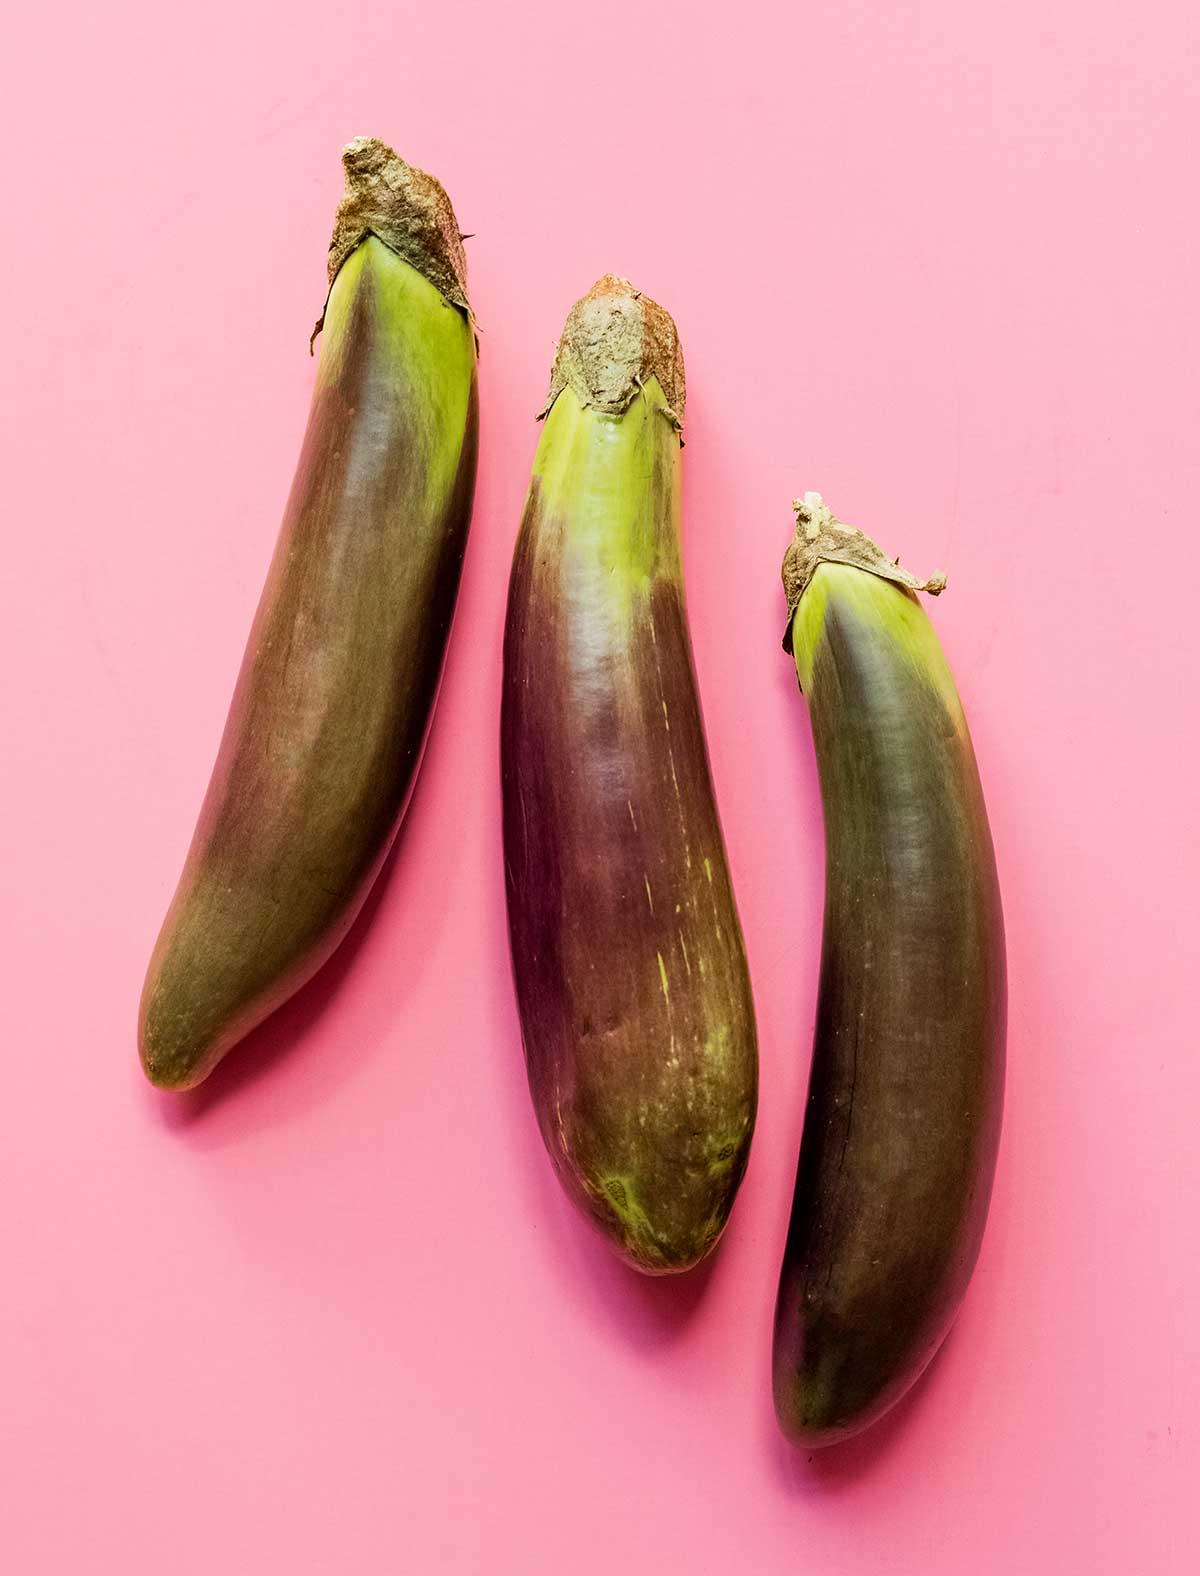 Three Filipino eggplants arranged in a row on a pink background